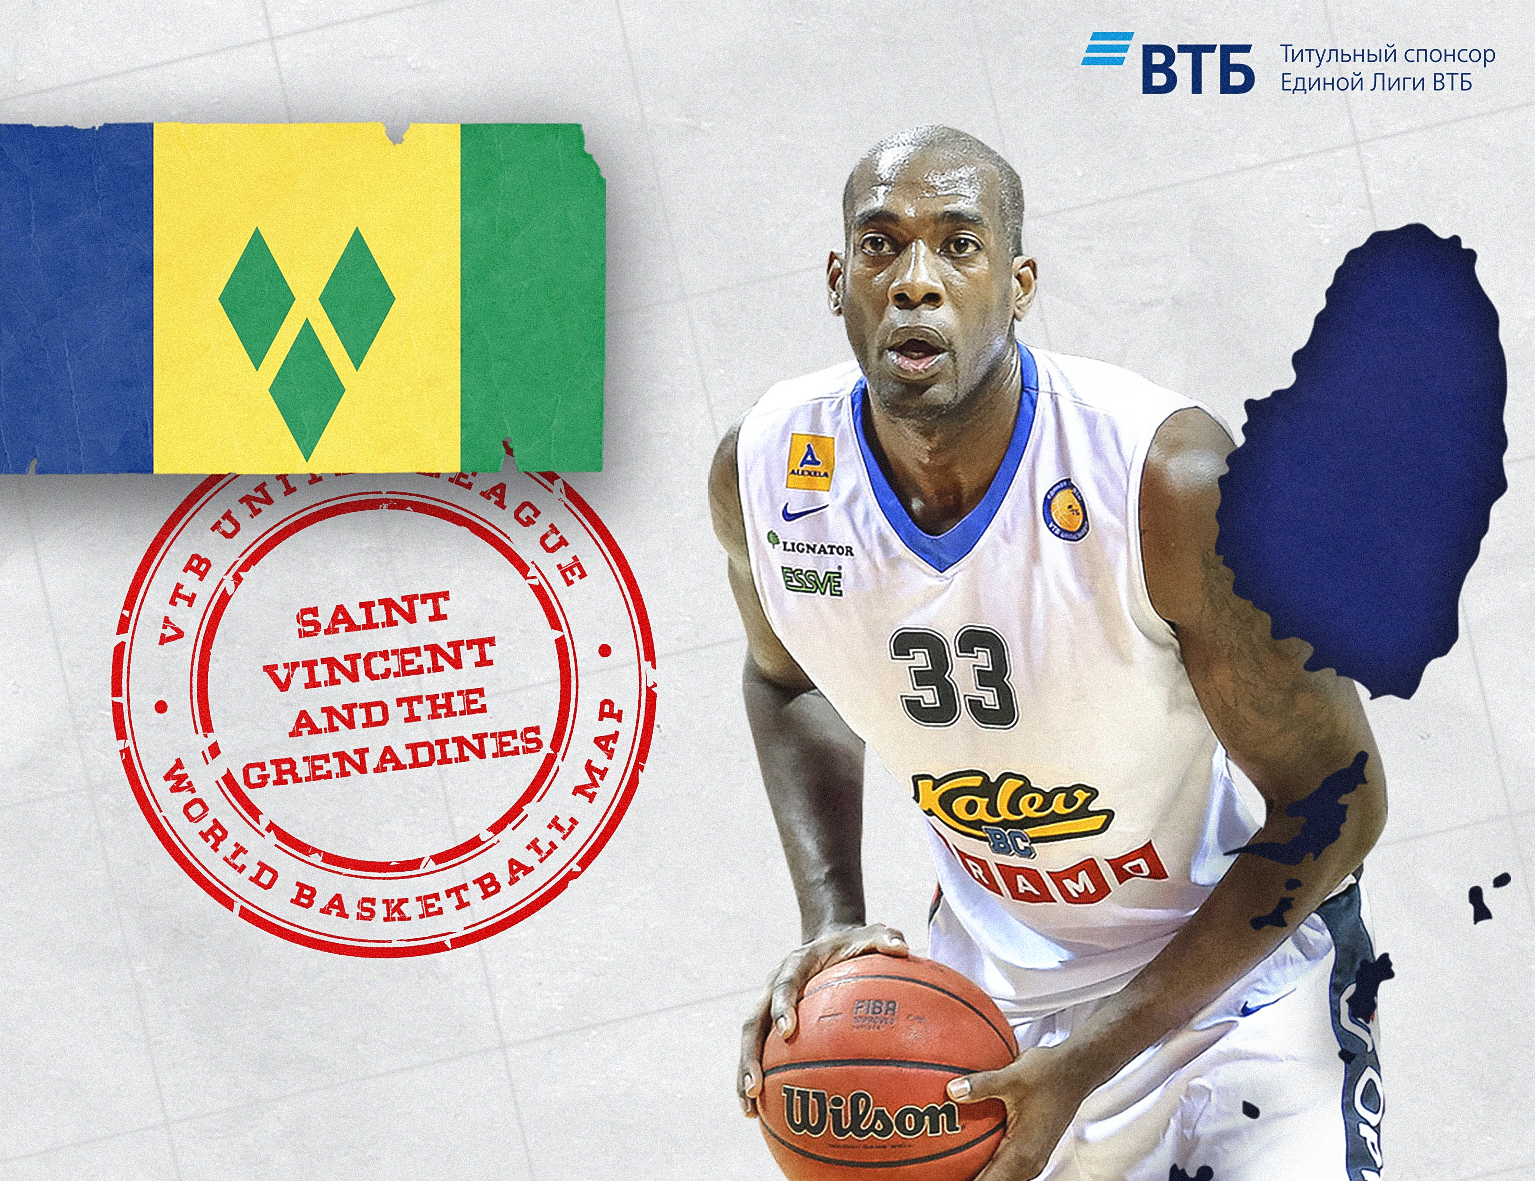 World basketball map: St. Vincent and the Grenadines